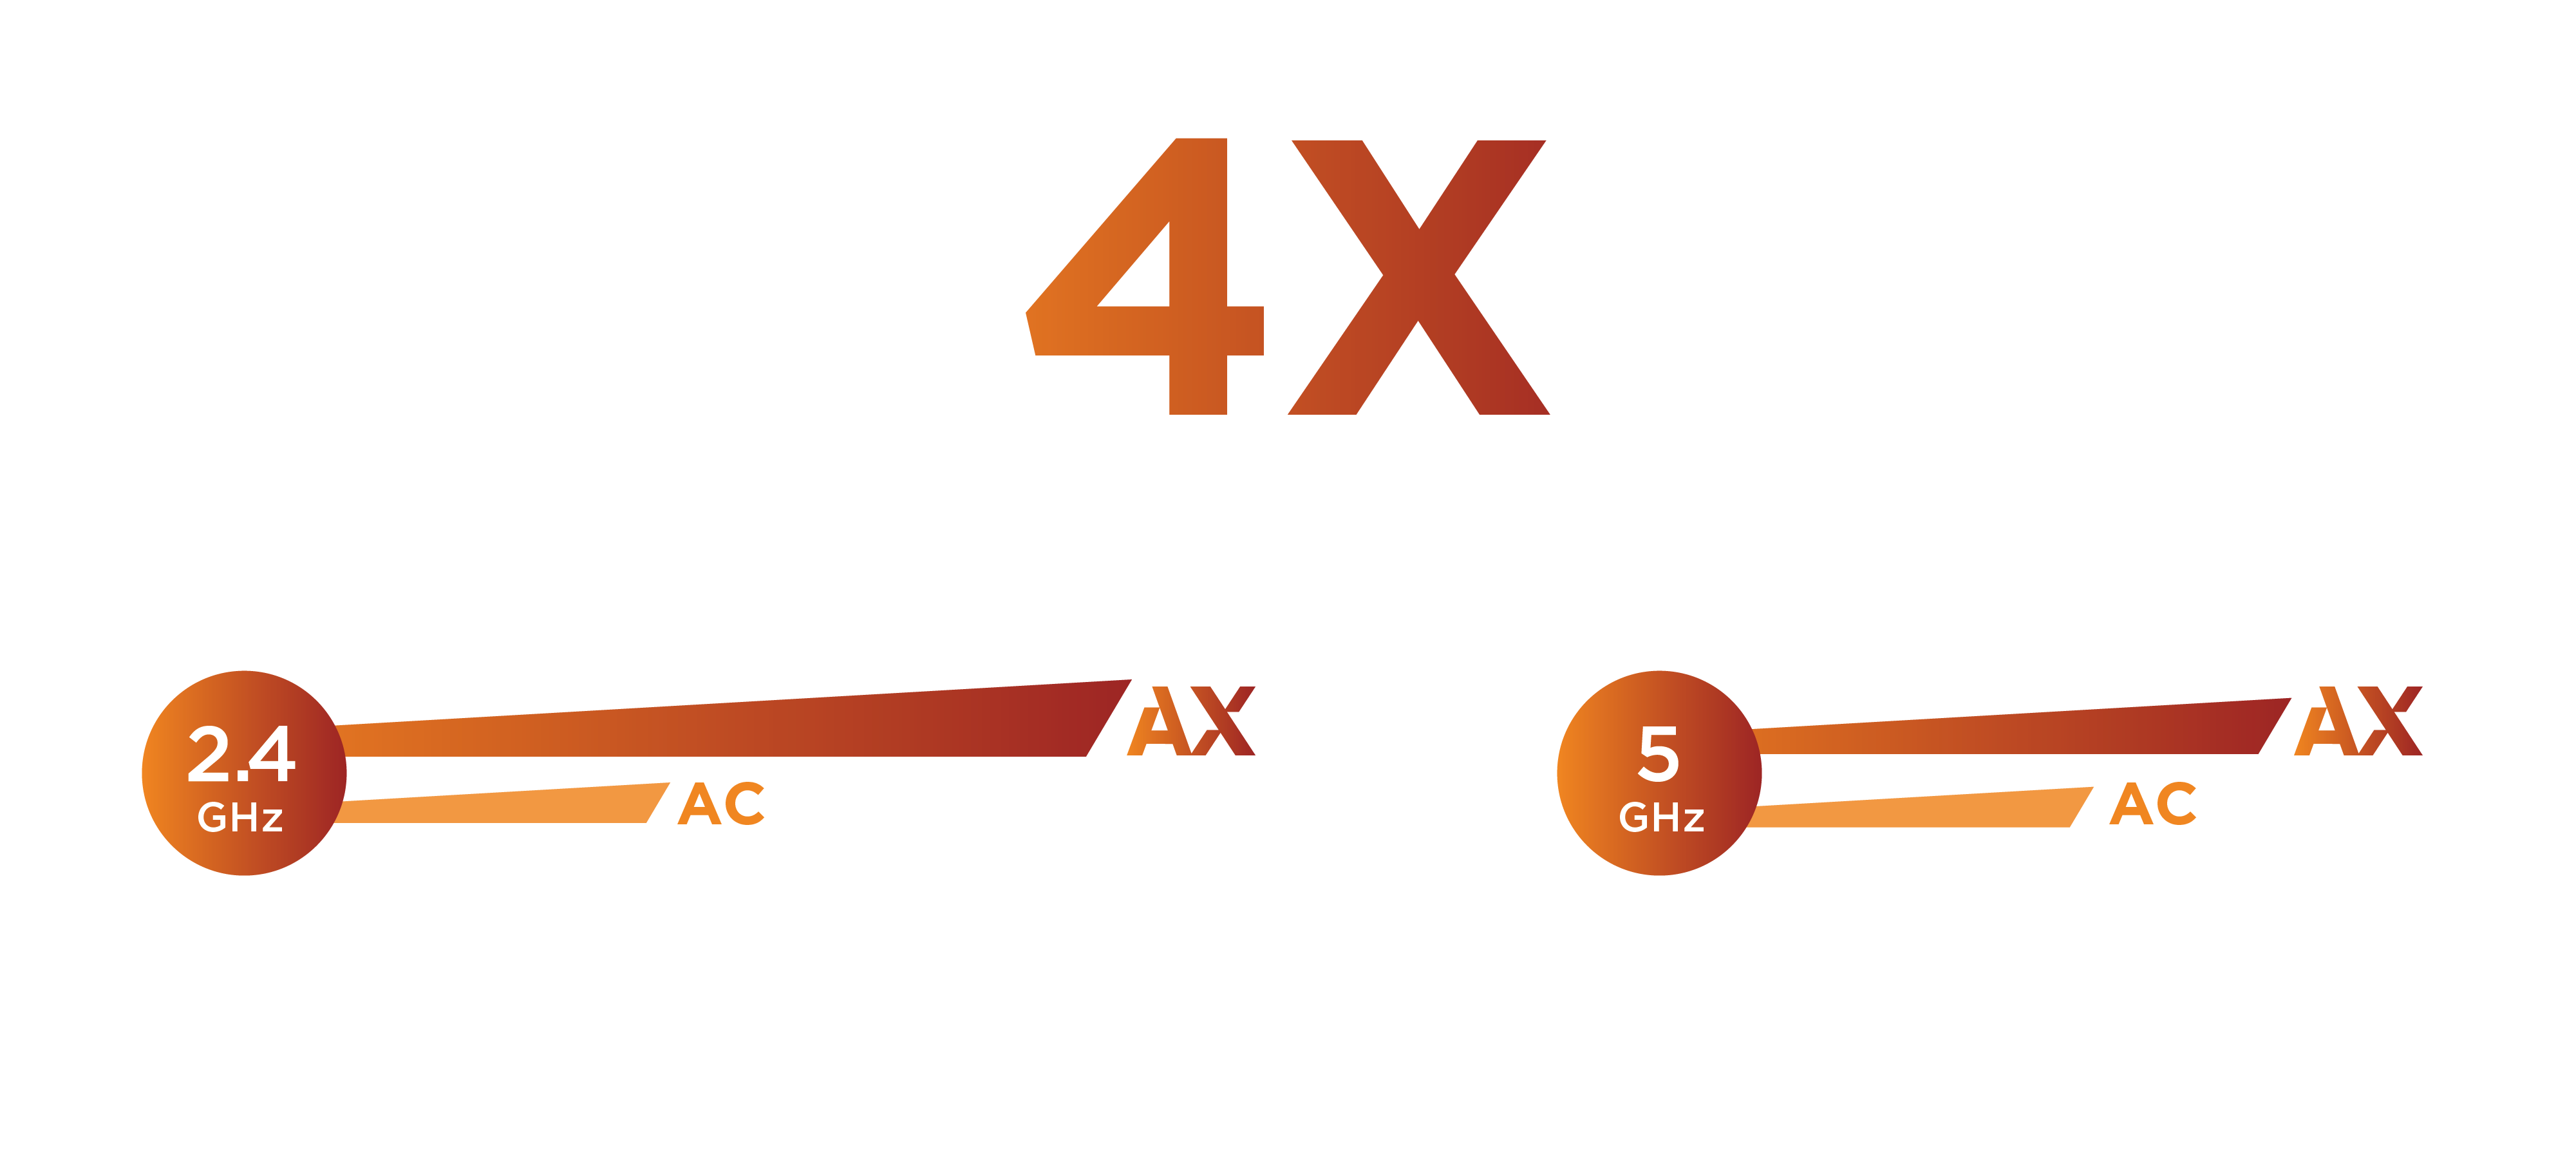 More Device capacity than AC WiFi